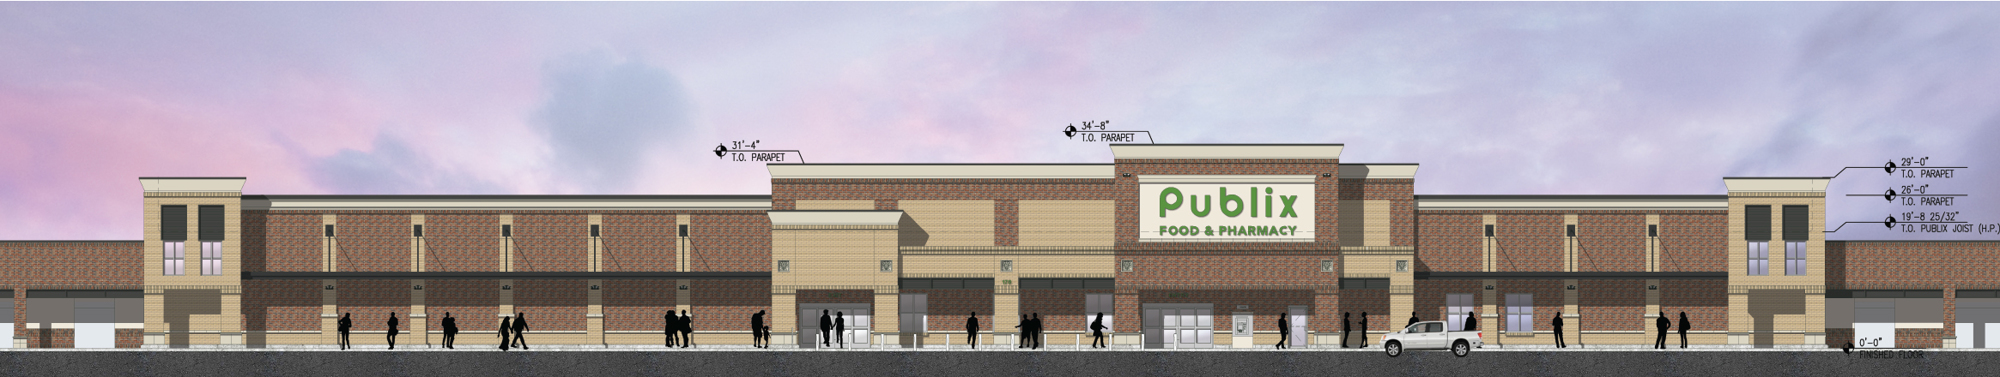 Publix plans to demolish about 55,000 square feet of the existing grocery store and retail space to make way for the new grocery.